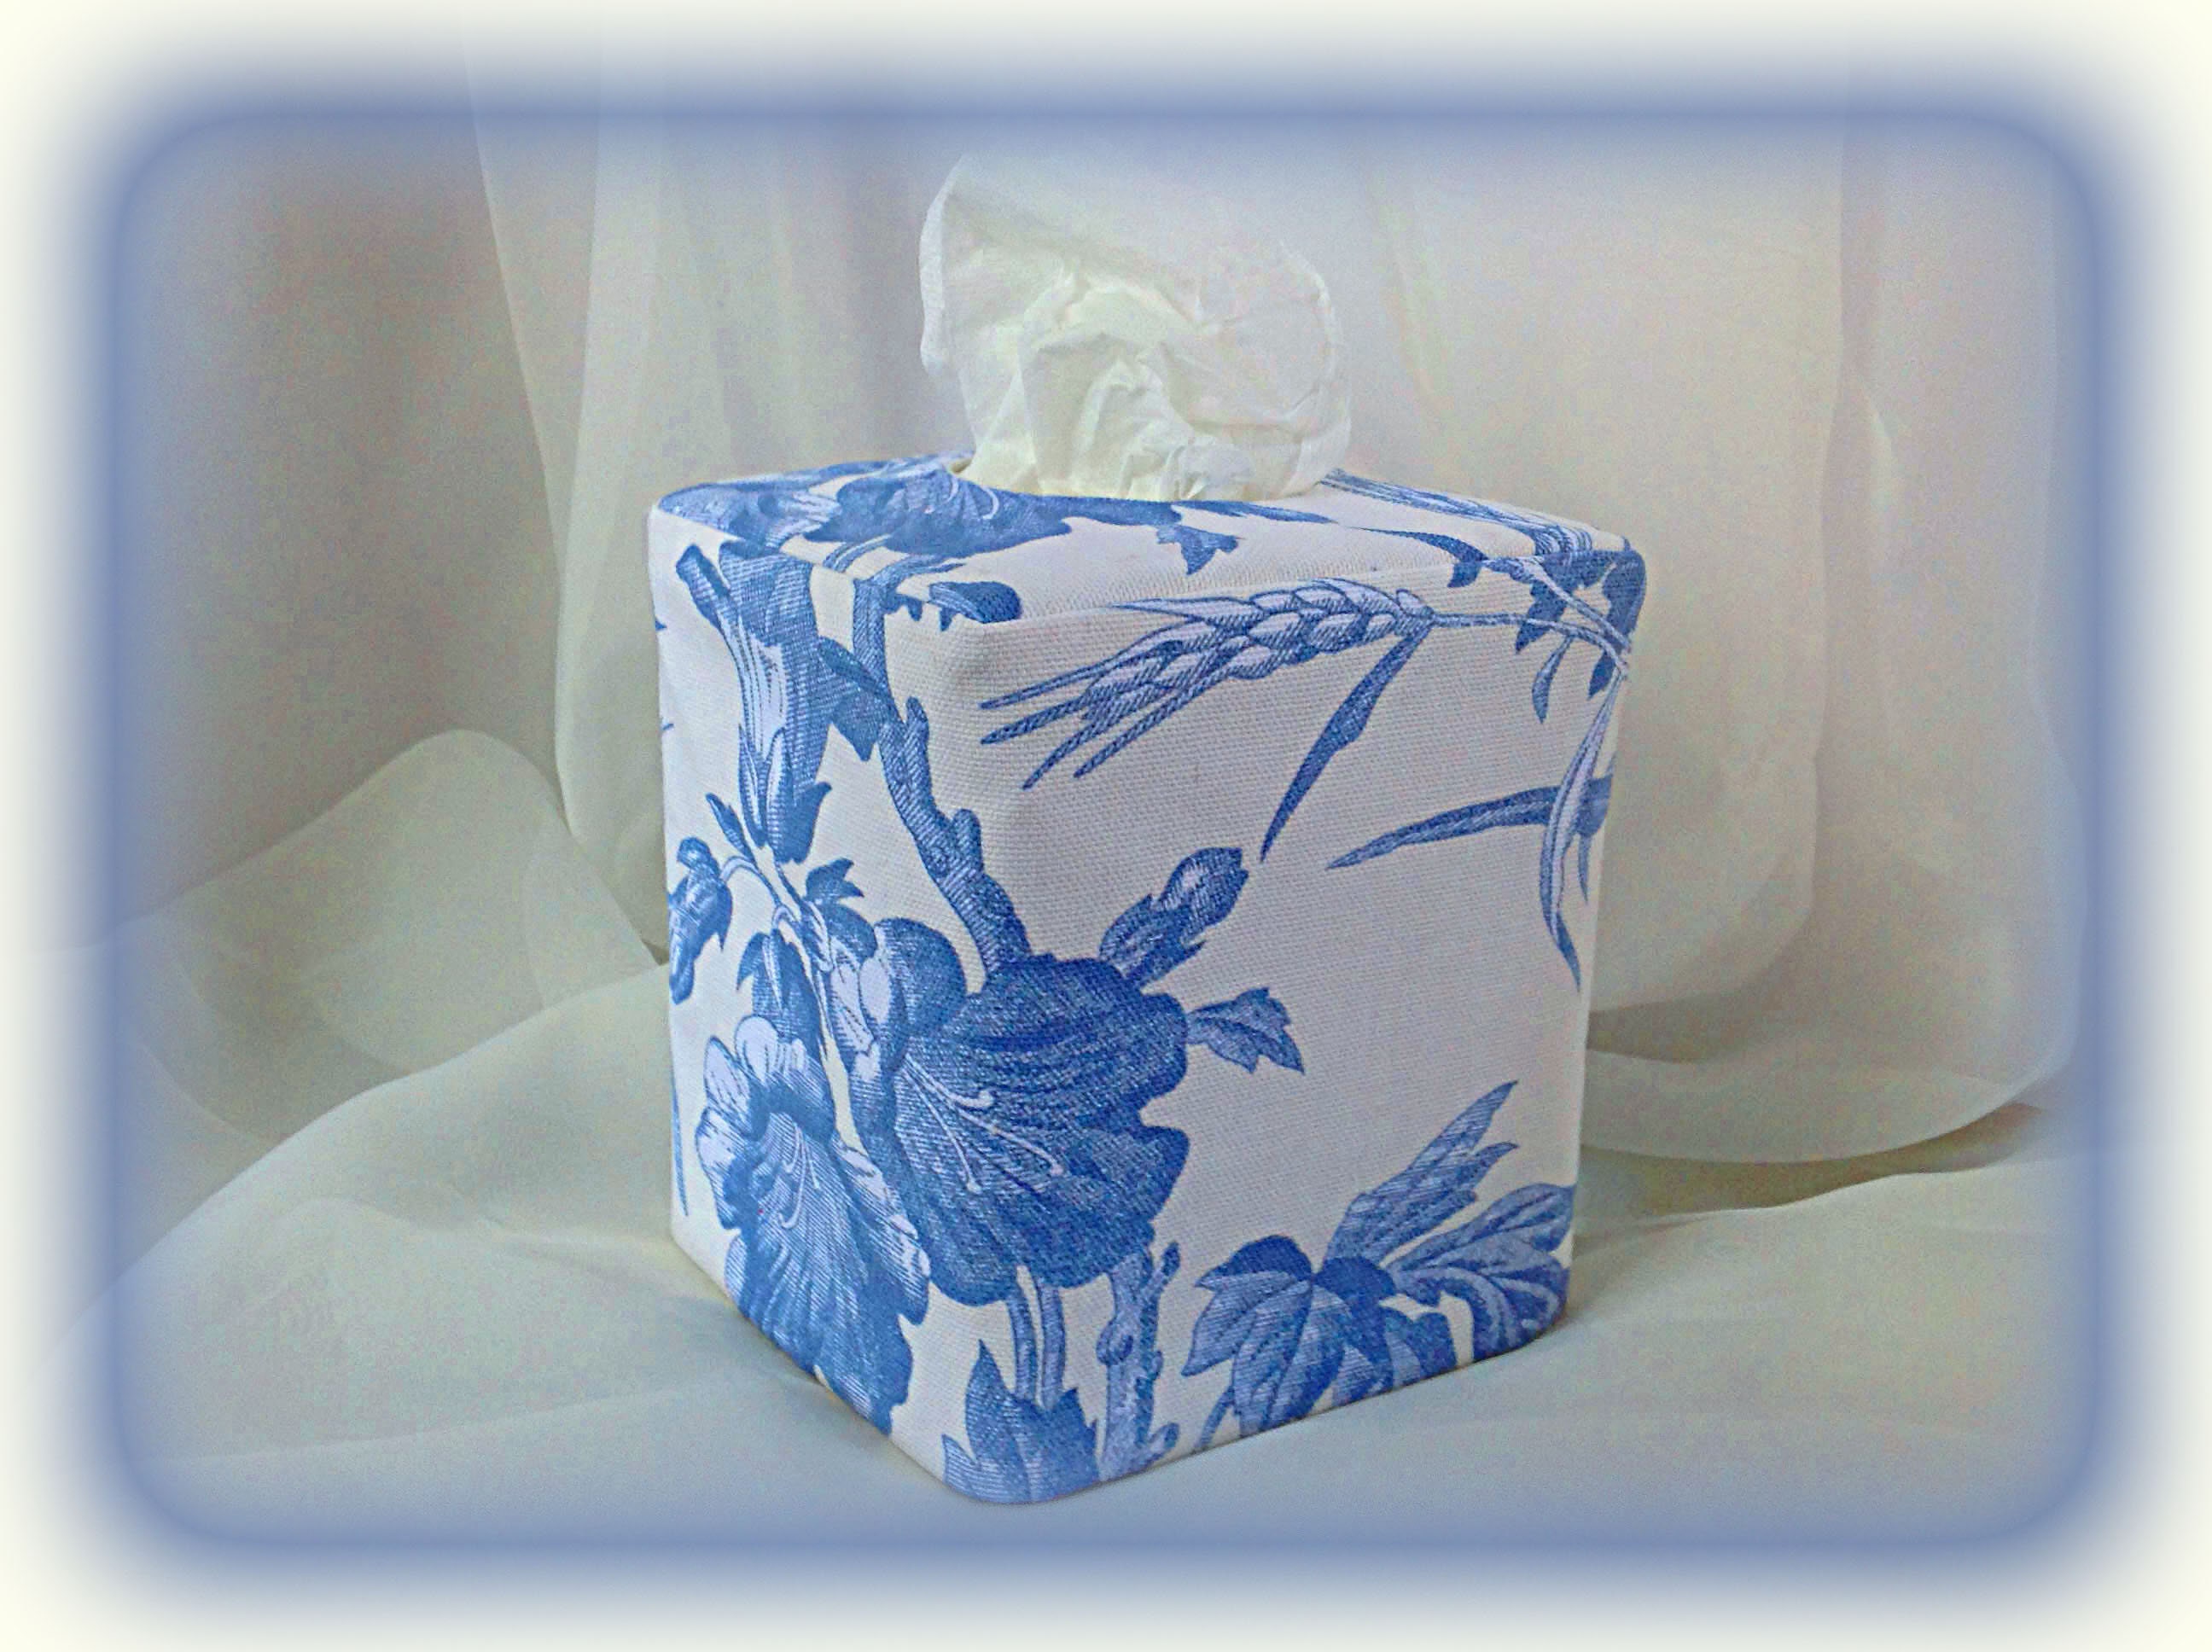 Vintage tissue box cover - White with blue design 1